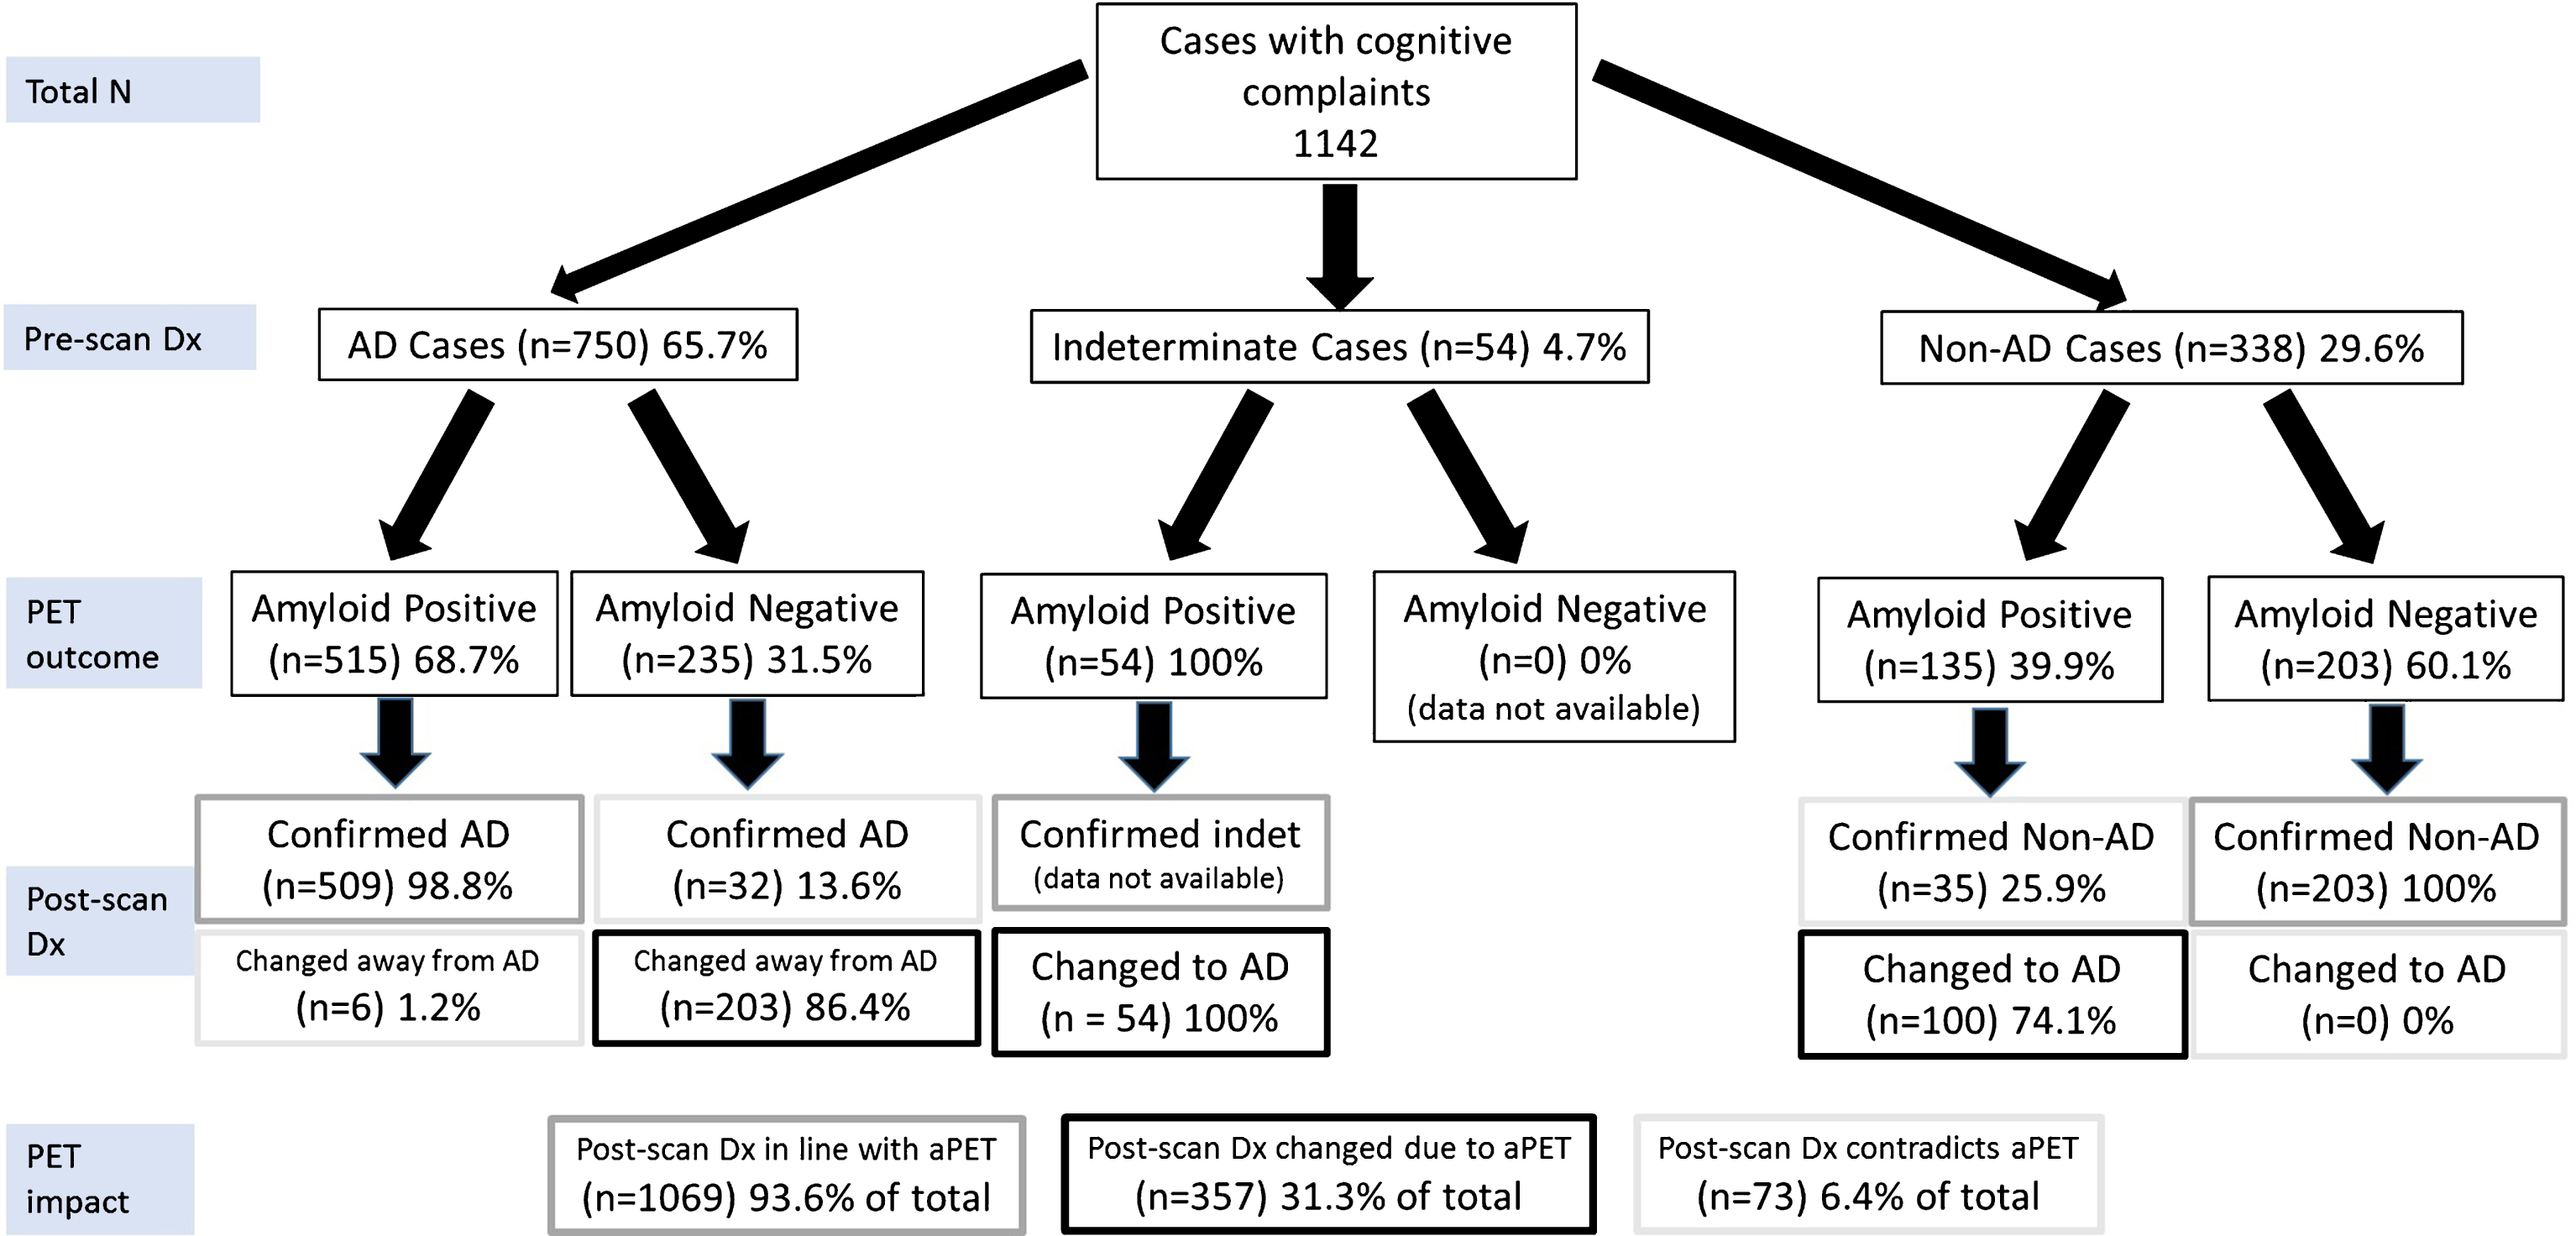 Primary analysis of the diagnostic trajectories for patients without CSF or FDG-PET data available at the time of the pre-scan diagnosis (Group 1). All included subjects were broadly classified into presumed AD, Non-AD or indeterminate as per Supplementary Table 6. Due to the included studies’ reporting format, it was not possible to include cases that undergo the following trajectories: indeterminate-nonAD, nonAD-indeterminate, indeterminate-indeterminate. Hence the only trajectory from indeterminate is indeterminate-AD. Each percentage reported relates to the level above it. Dx, diagnosis. PET, amyloid PET. Color coding from Post-scan Dx onwards: Grey boxes: diagnoses in line with aPET; Black boxes: diagnoses changed in line with PET, Light grey boxes: diagnoses changed or confirmed contradicting PET.